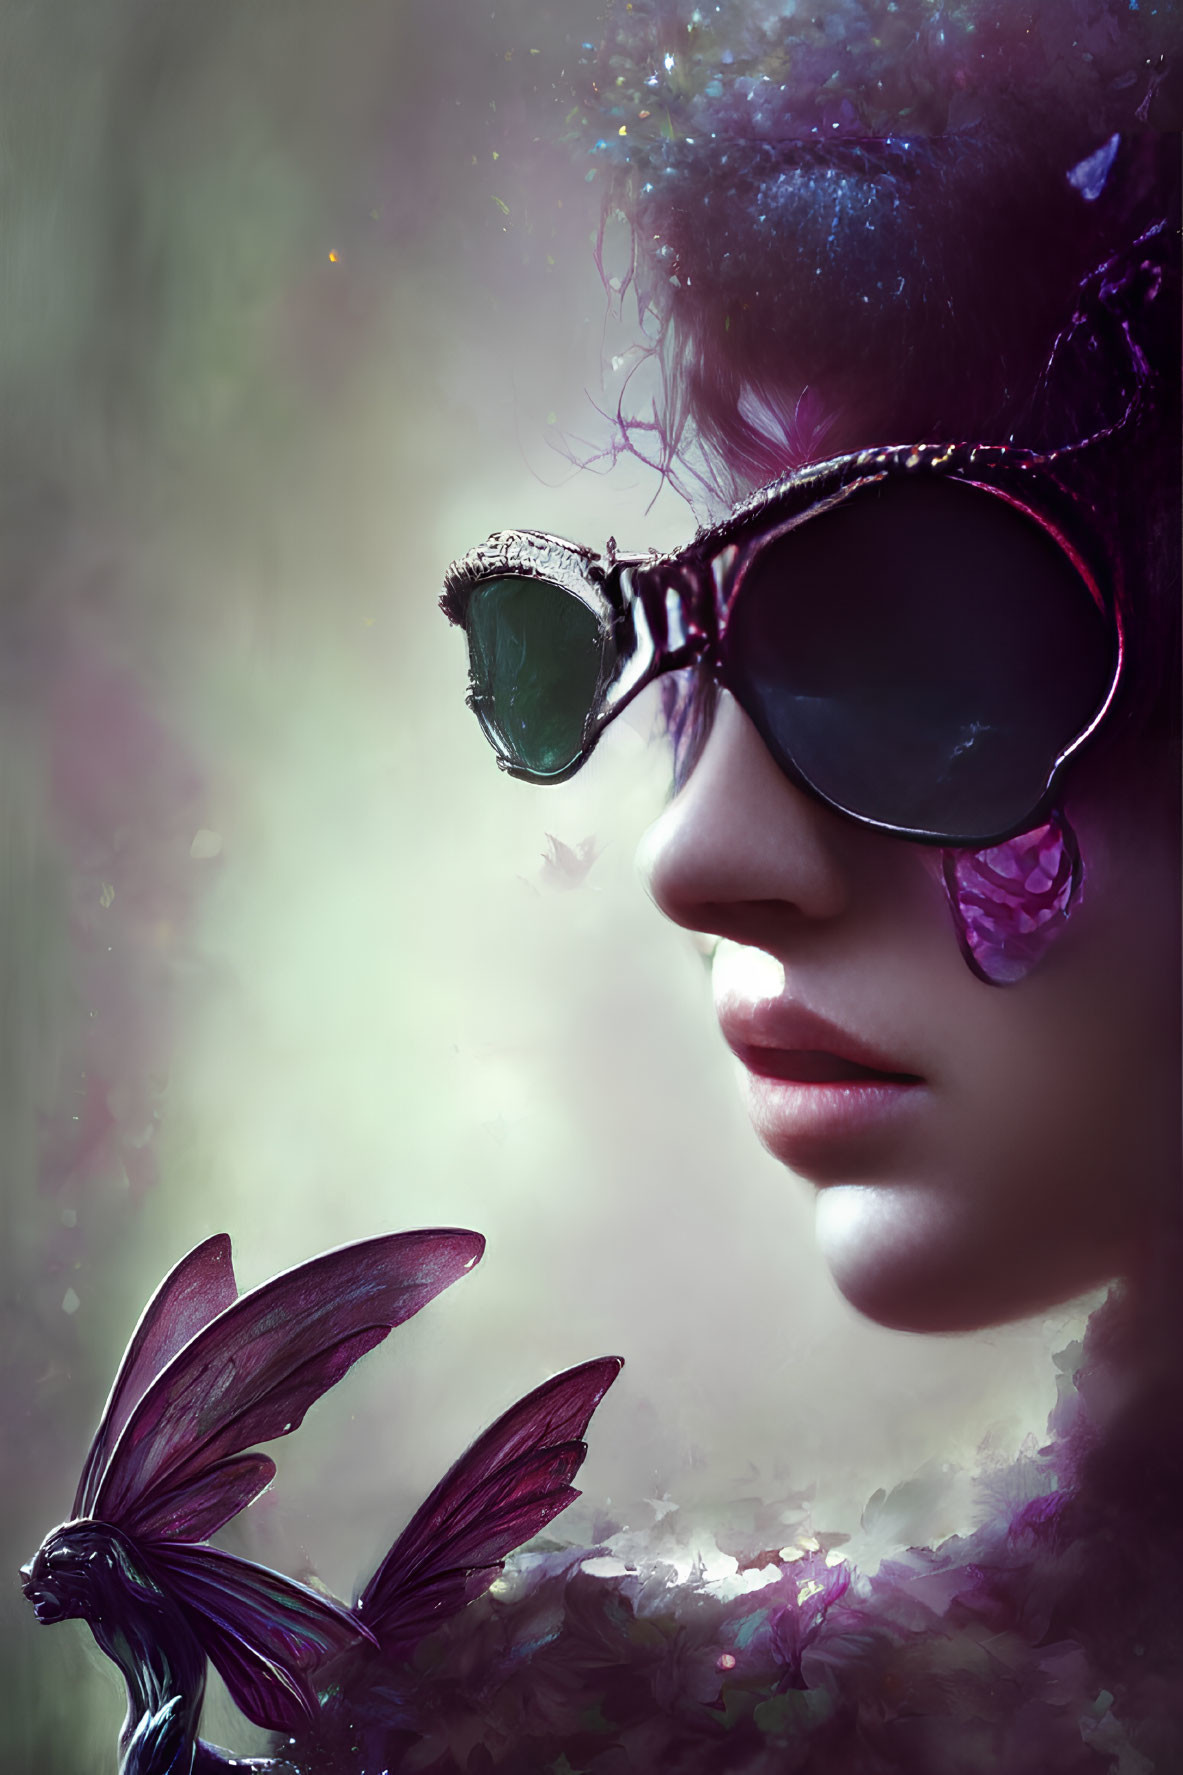 Colorful portrait with sunglasses and dragon on shoulder in misty setting